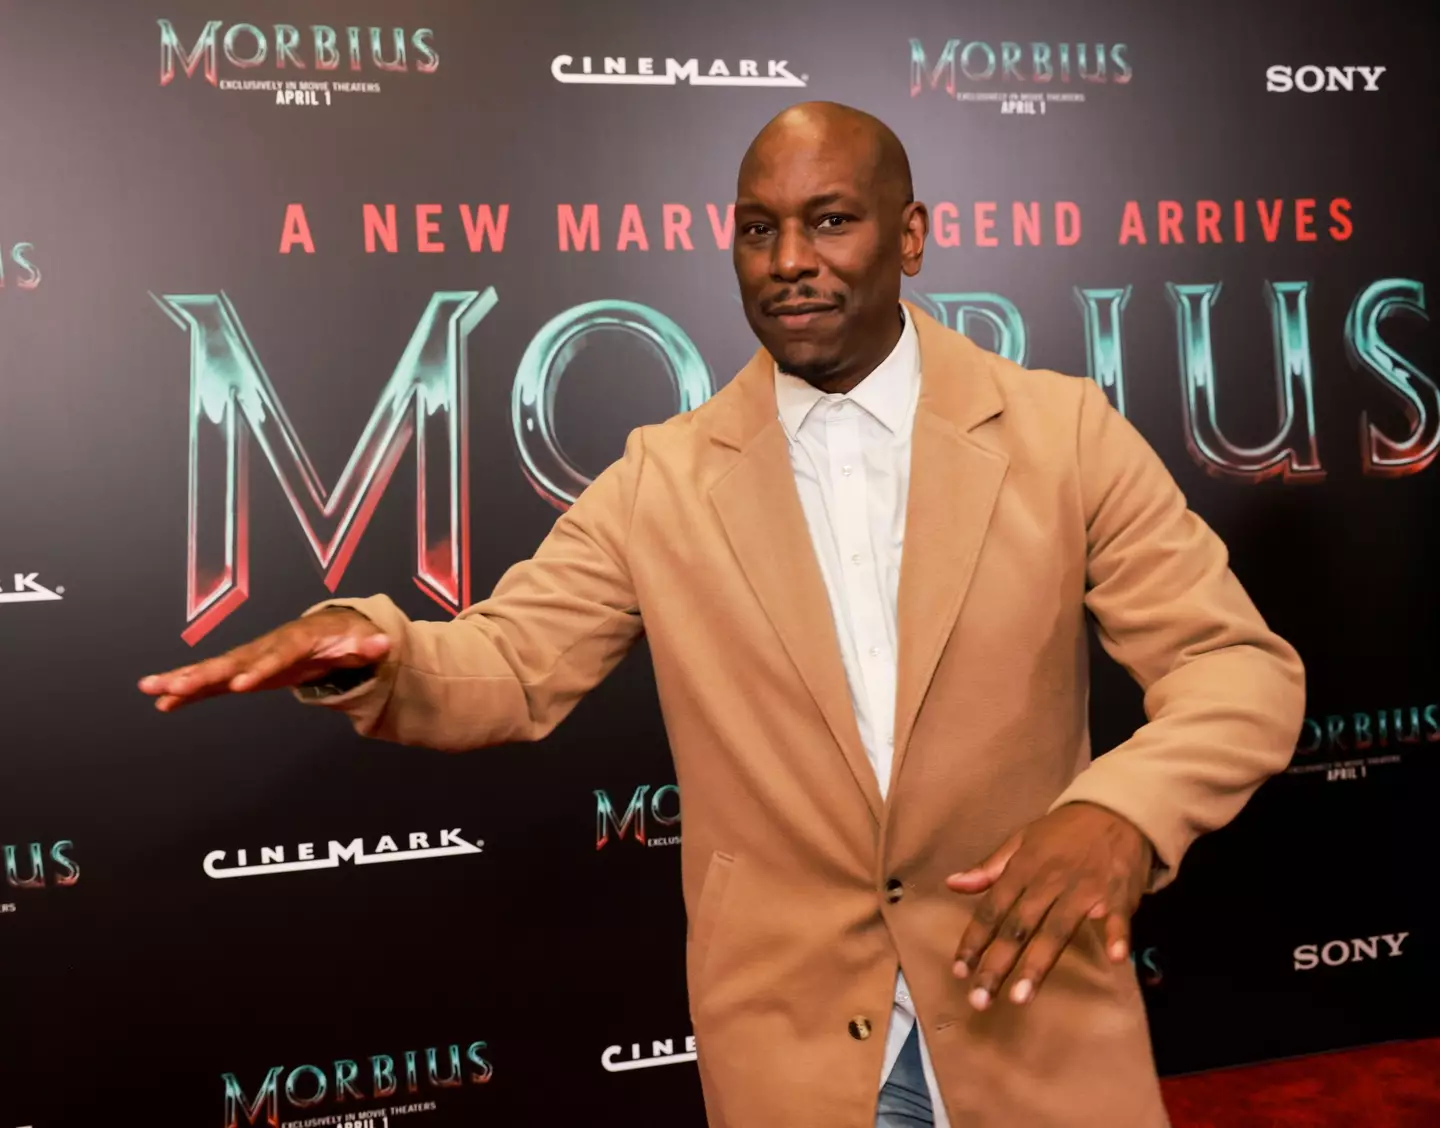 Tyrese Gibson at the Morbius premiere.